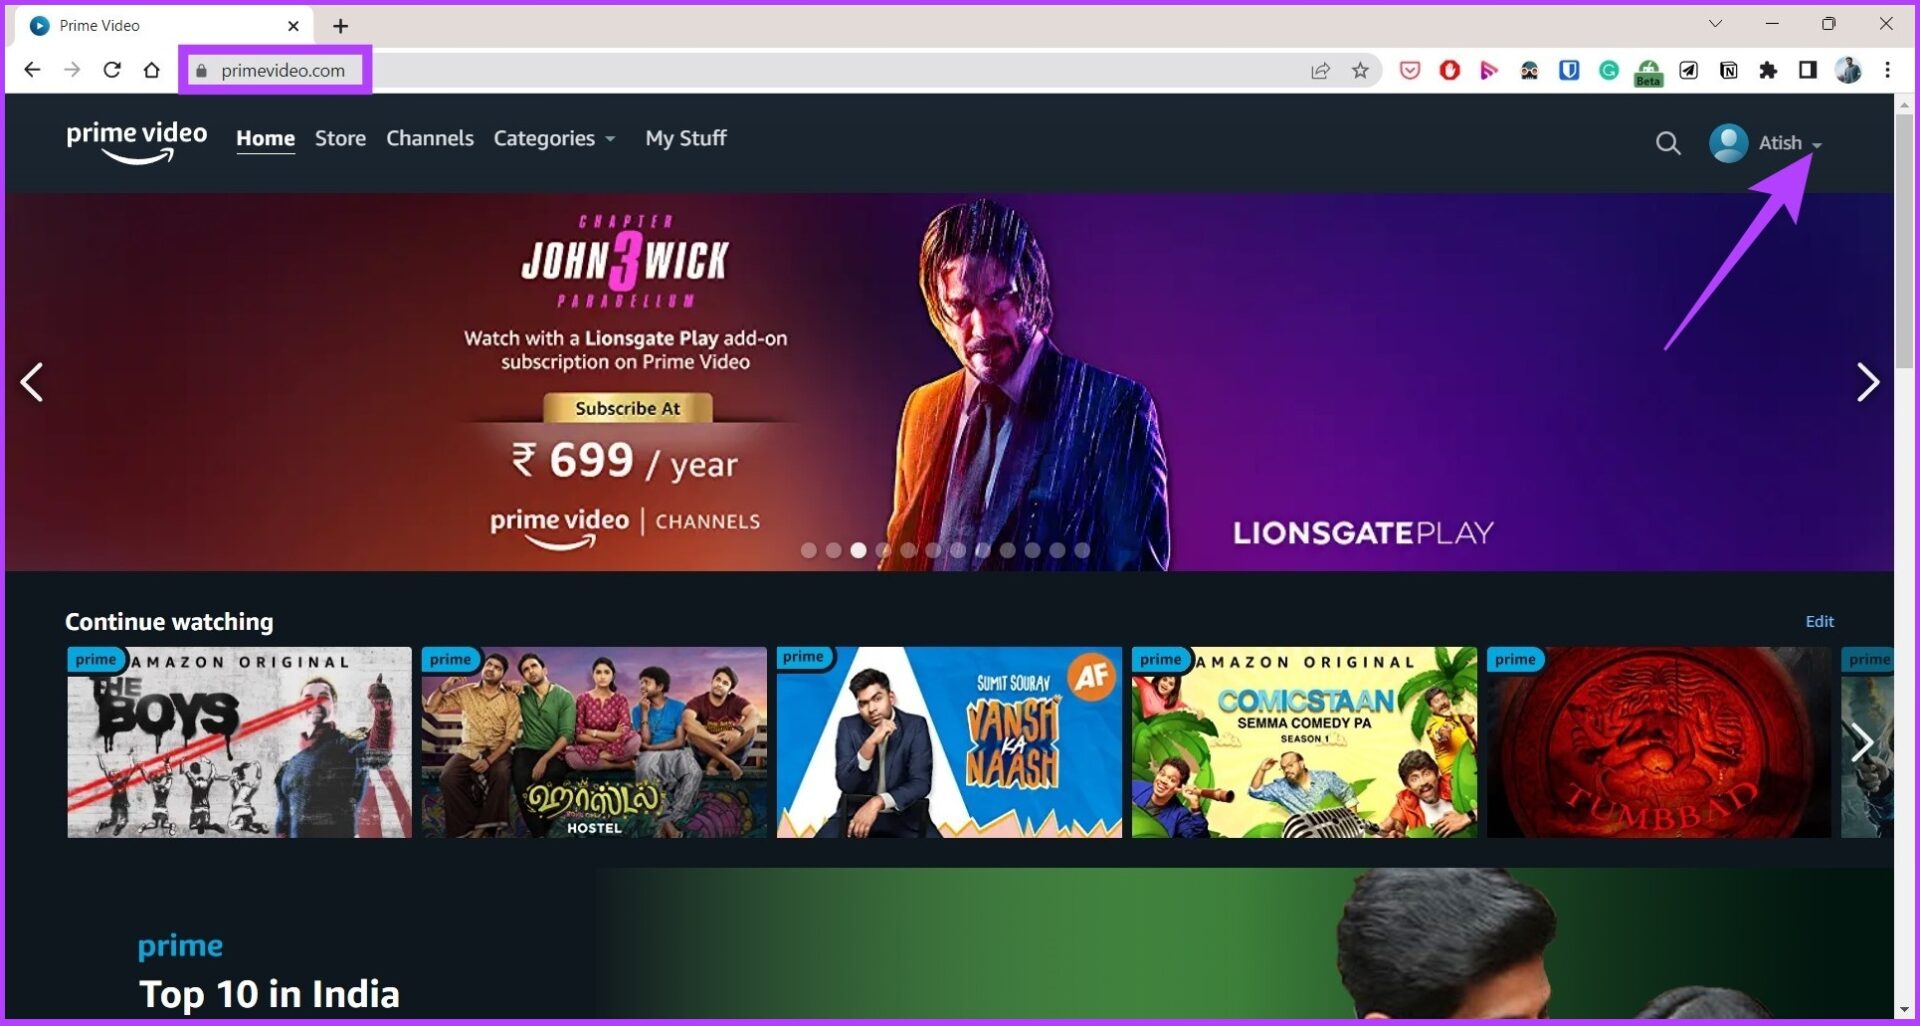 Open Prime Video on your web browser